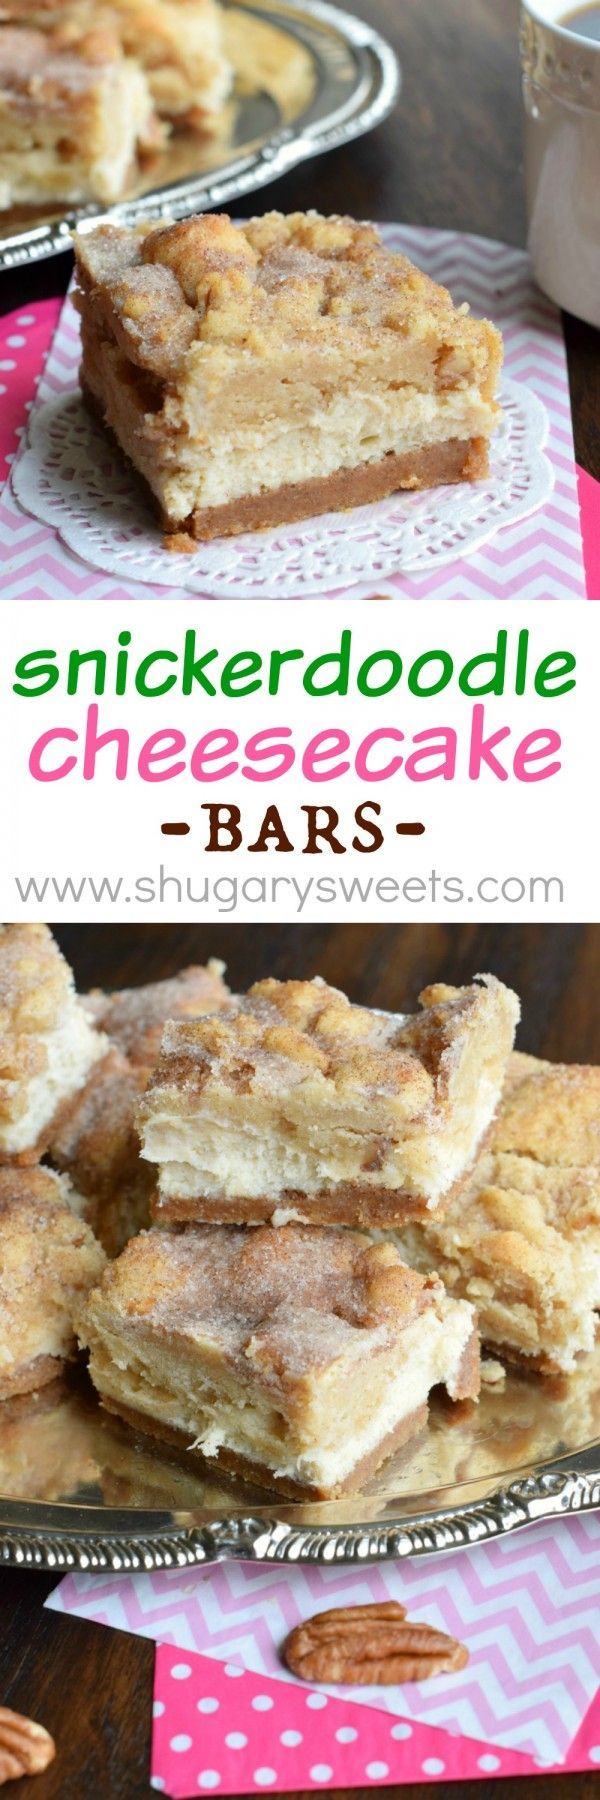 Snickerdoodle Cheesecake Bars: delicious sweet and salty crust, creamy cheesecake filling topped with a cinnamon sugar pecan